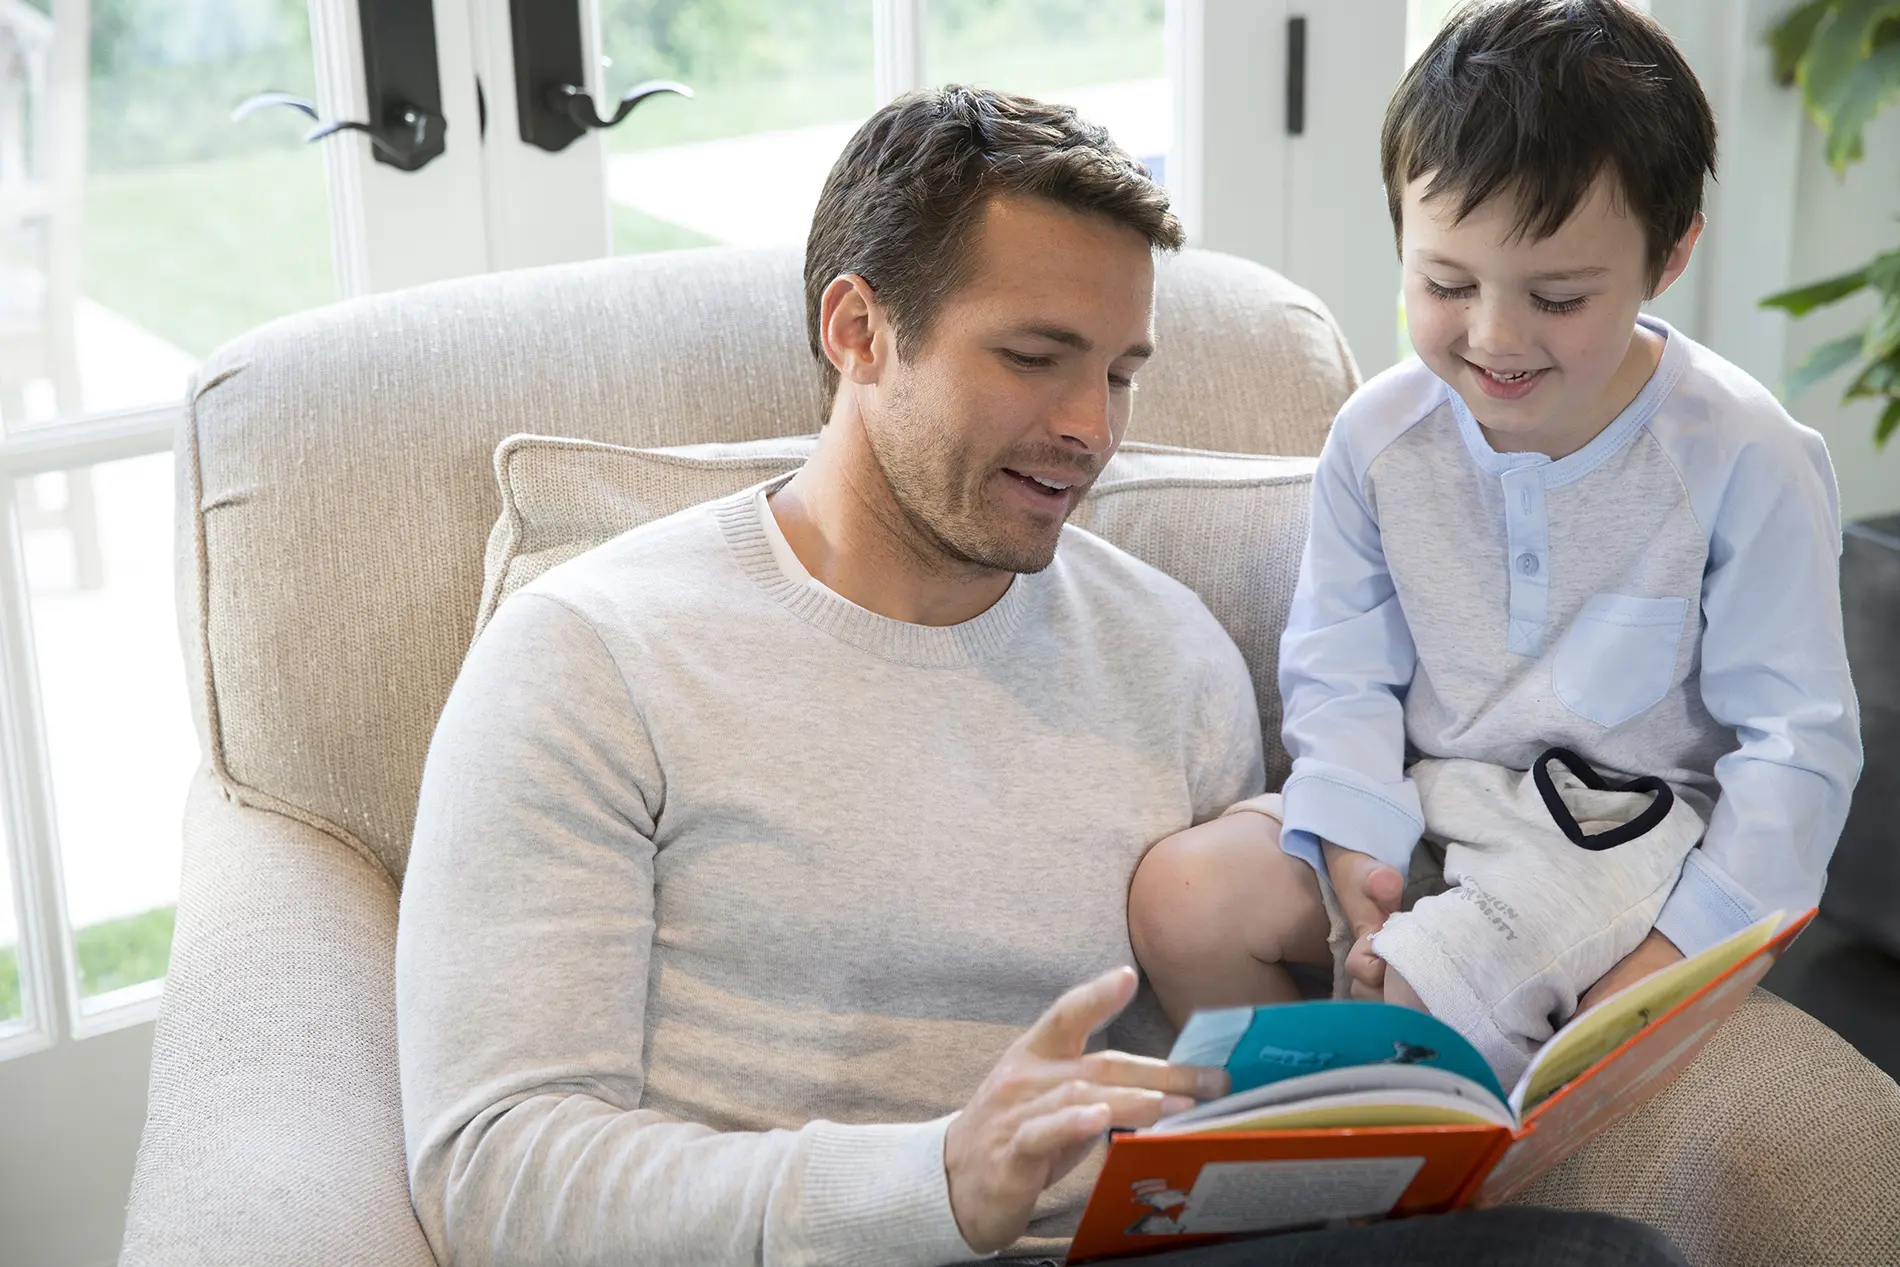 Let CPS help improve your indoor air quality so you can spend more quality time with family.